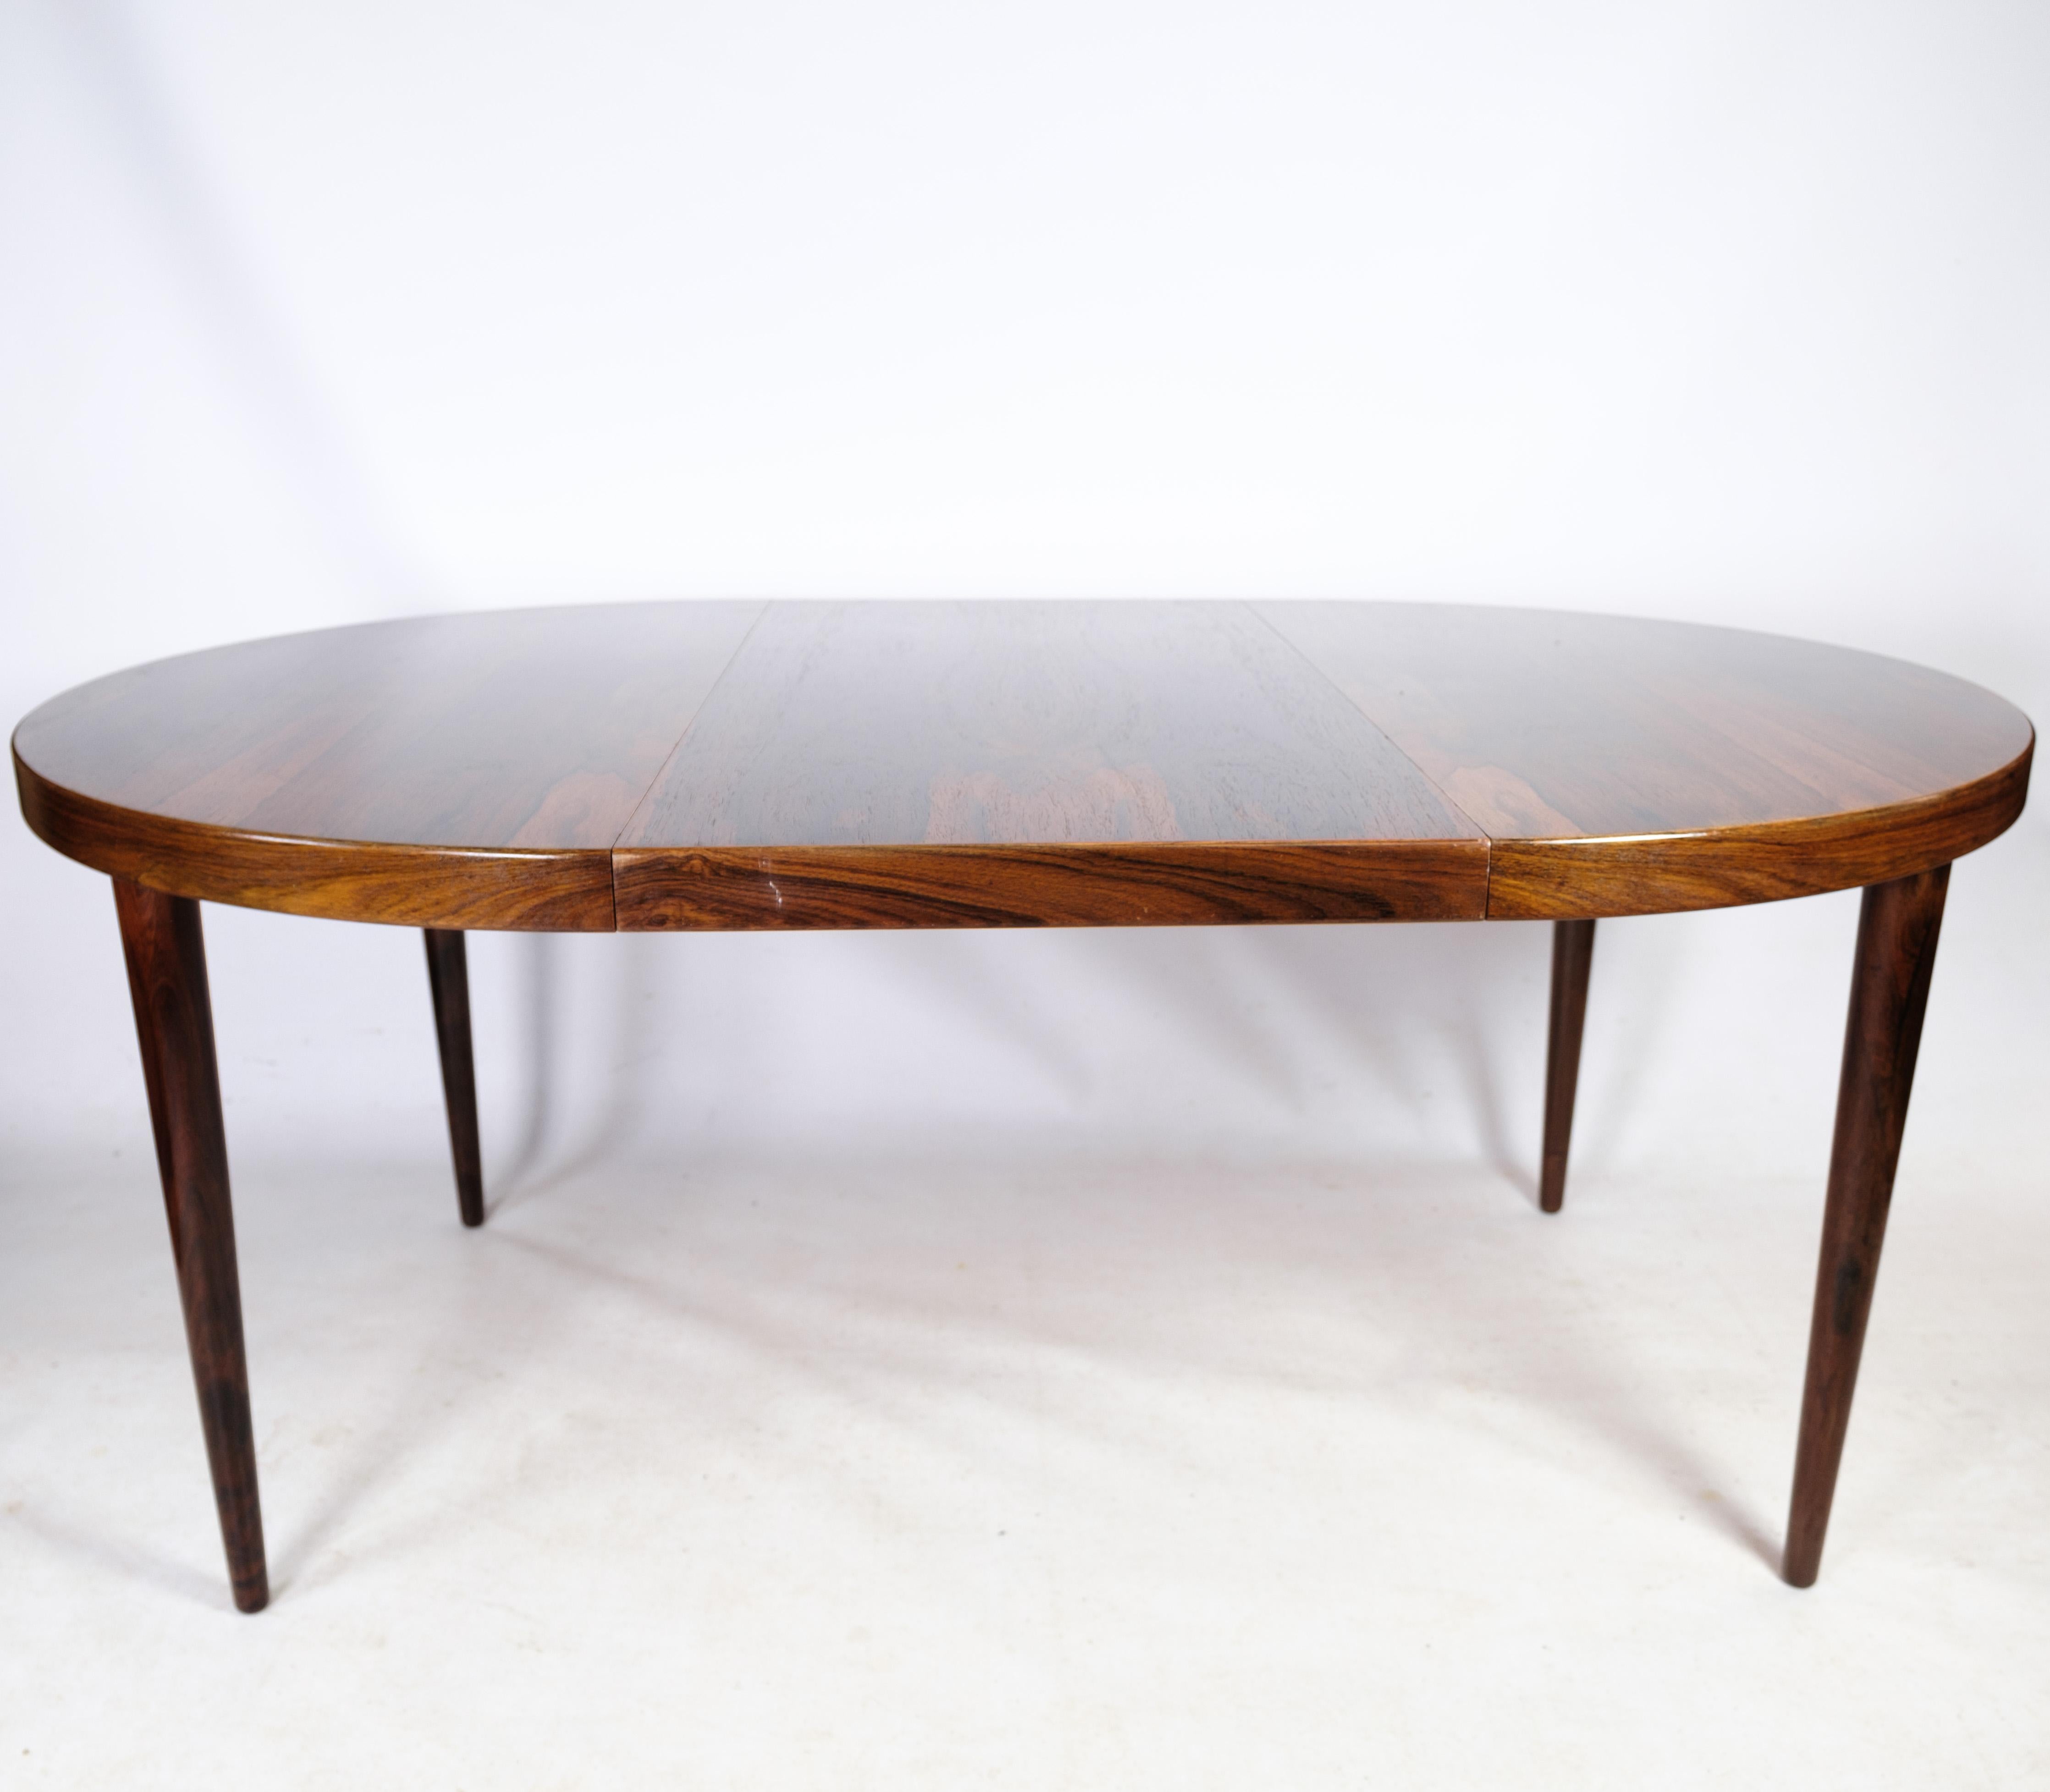 Round Dining Table, Rosewood, Omann Junior, Danish Design, 1960 For Sale 3